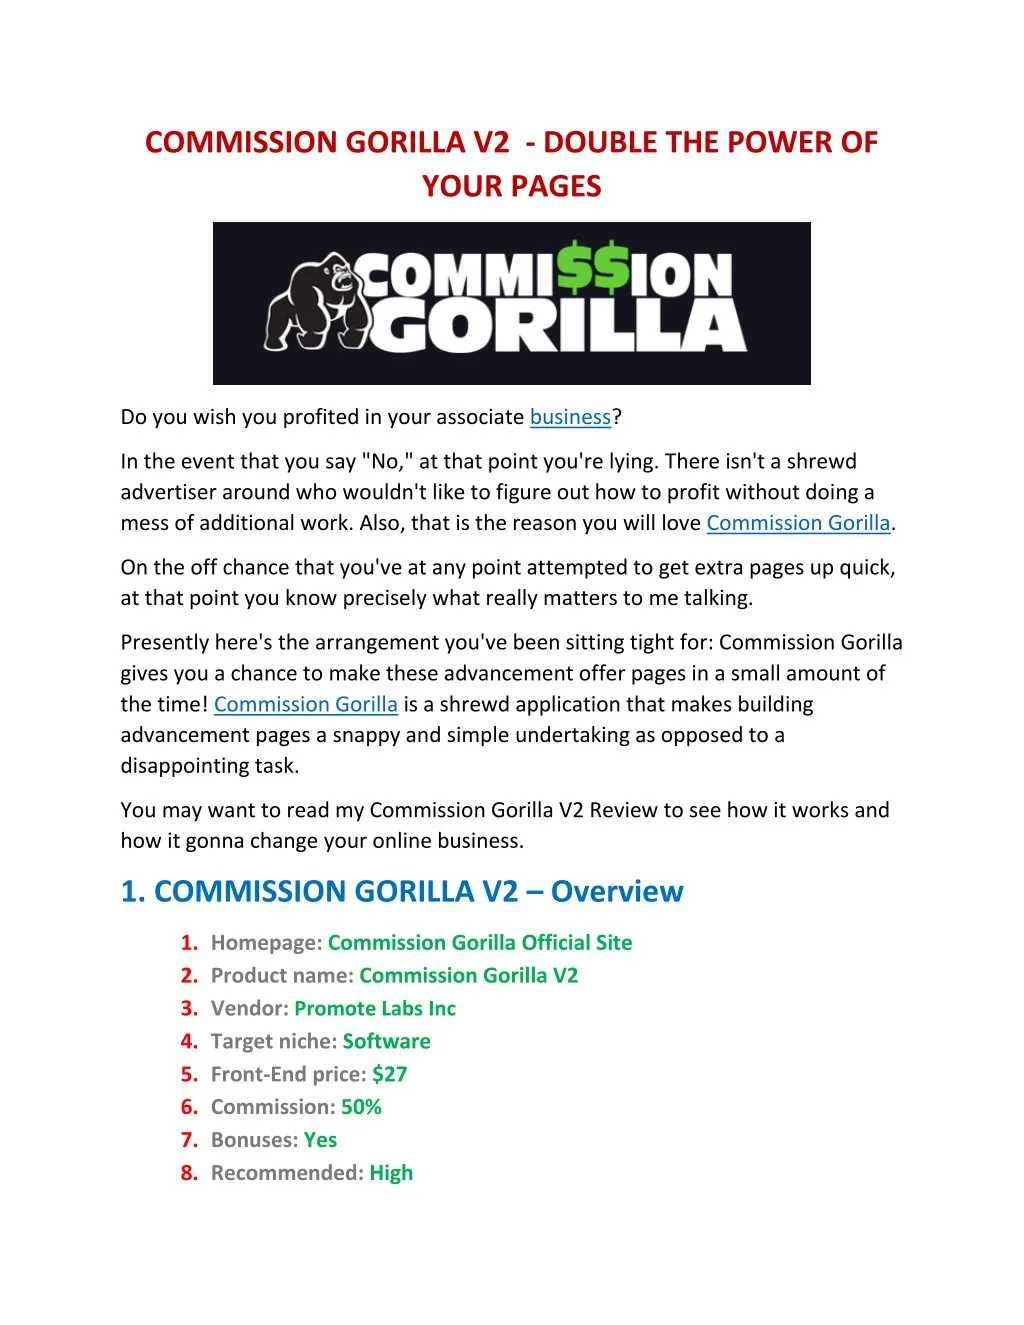 commission gorilla v2 double the power of your